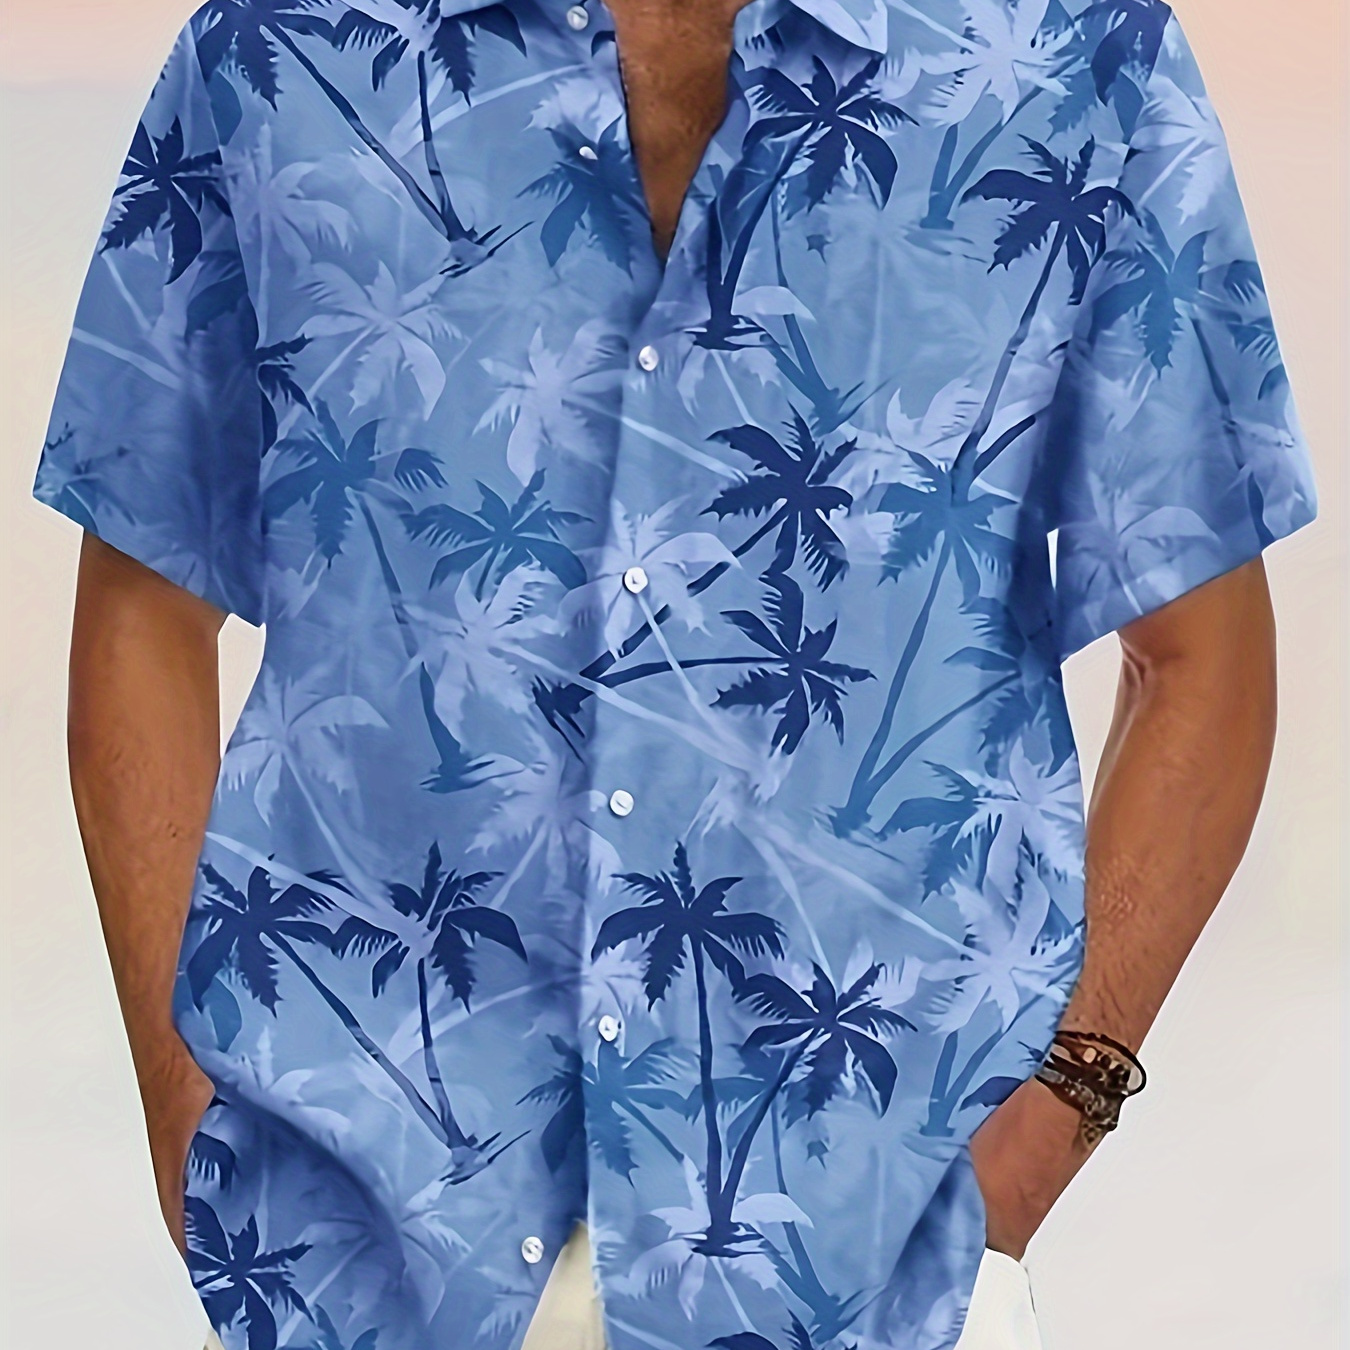 

Men's Coconut Trees Print Shirt, Casual Breathable Lapel Button Up Short Sleeve Shirt For Summer Outdoor Activities